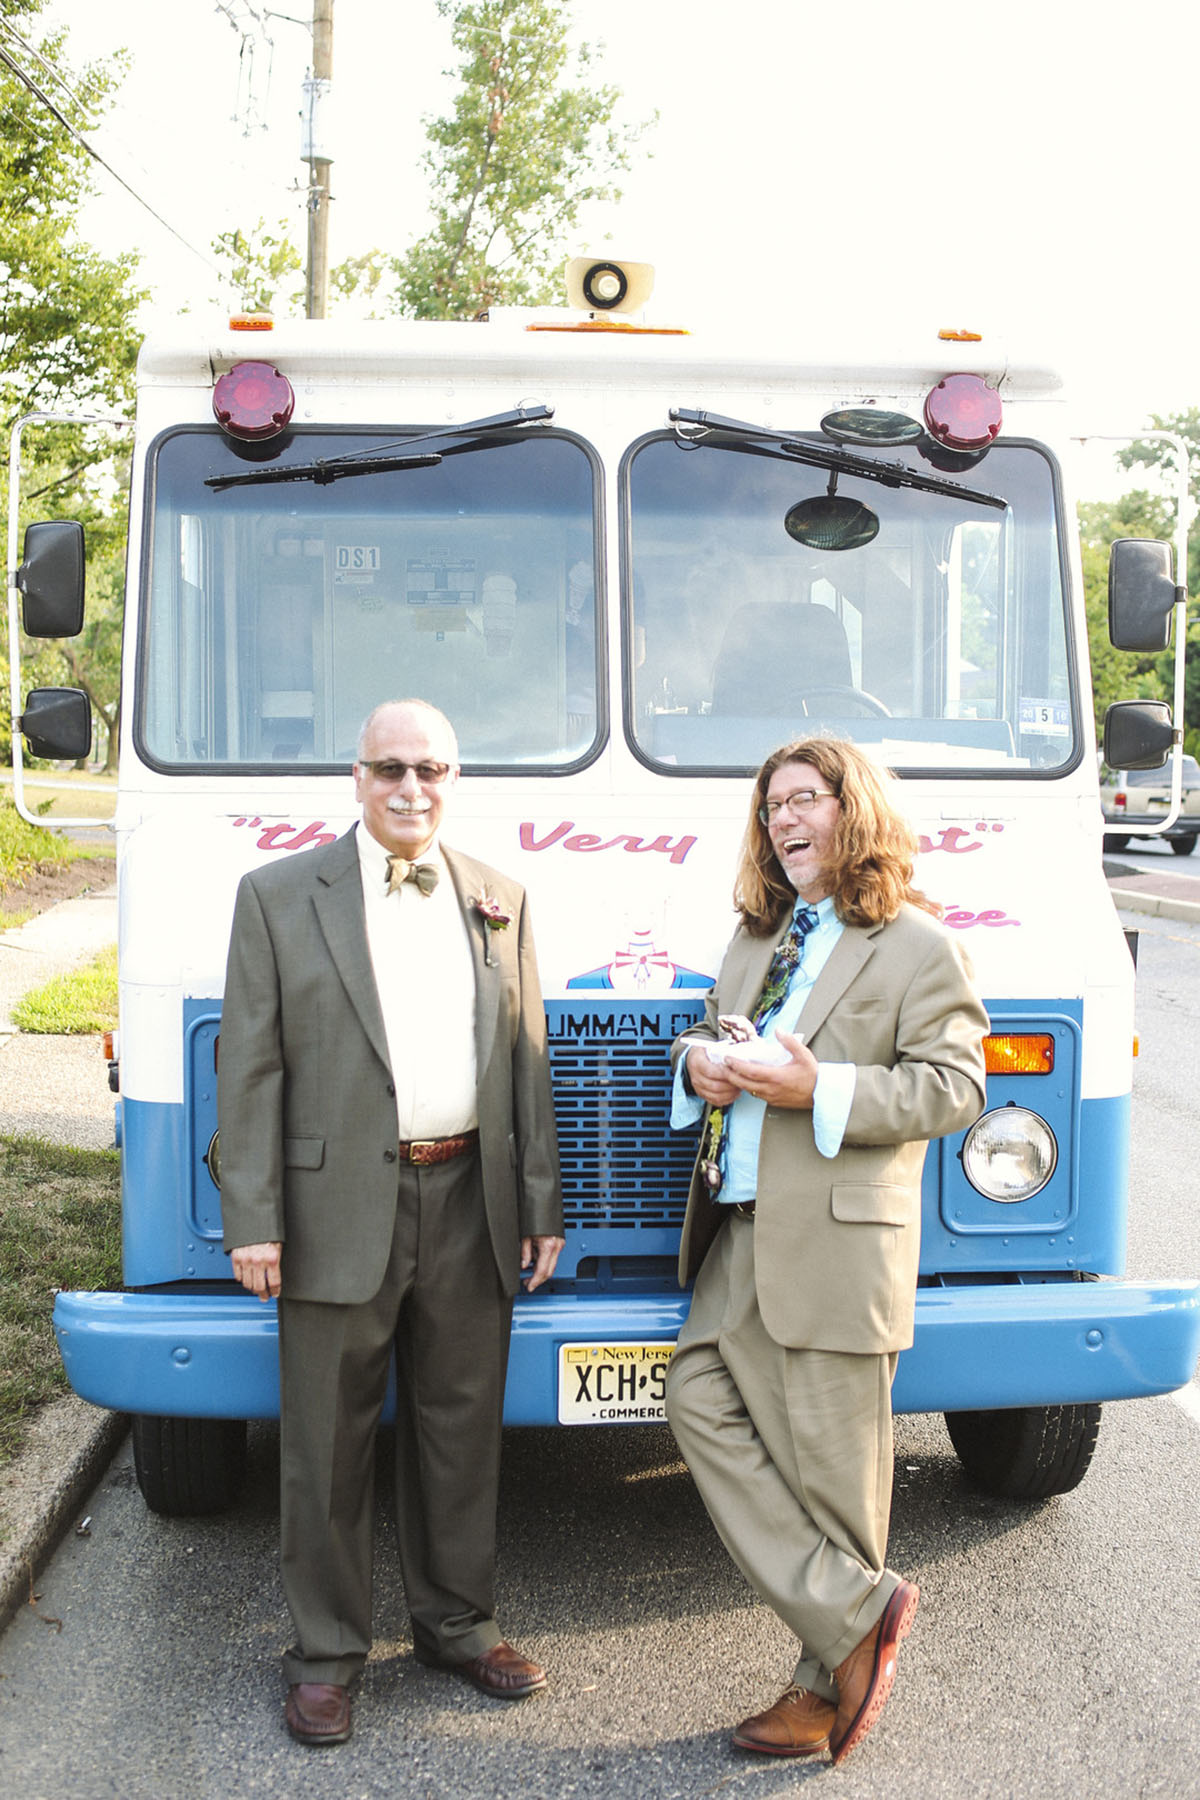 Unique and nostalgic backyard wedding after 29 years together ice cream truck